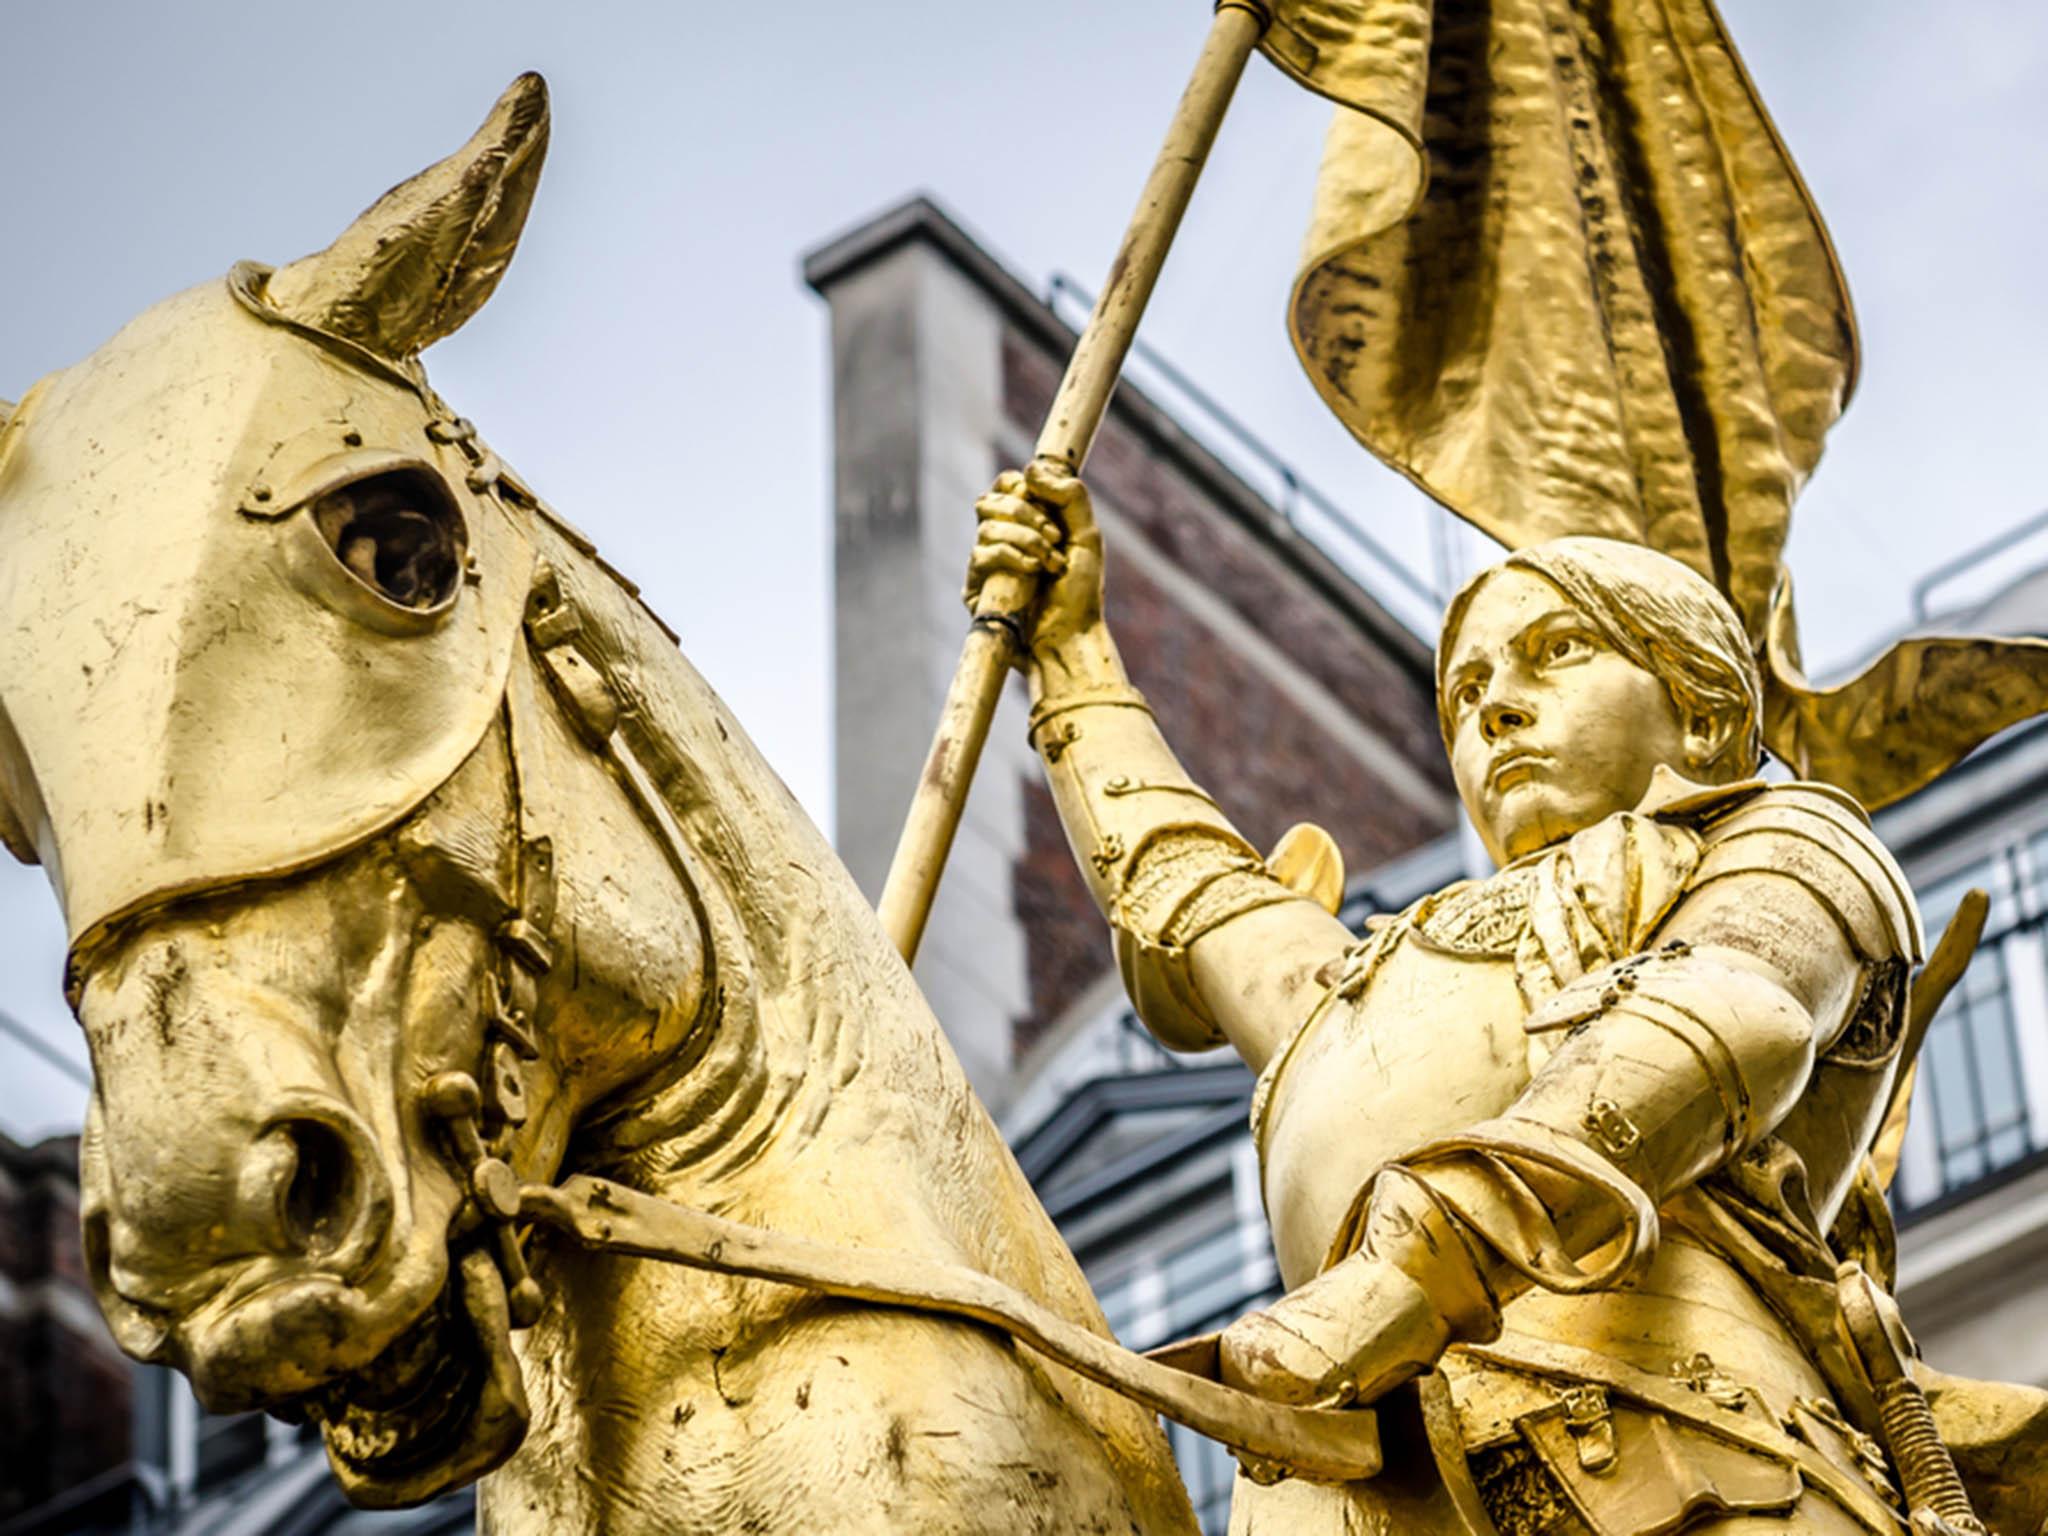 Joan of Arc led an army to victory dressed as a soldier during the Hundred Years War, when women were not supposed to fight